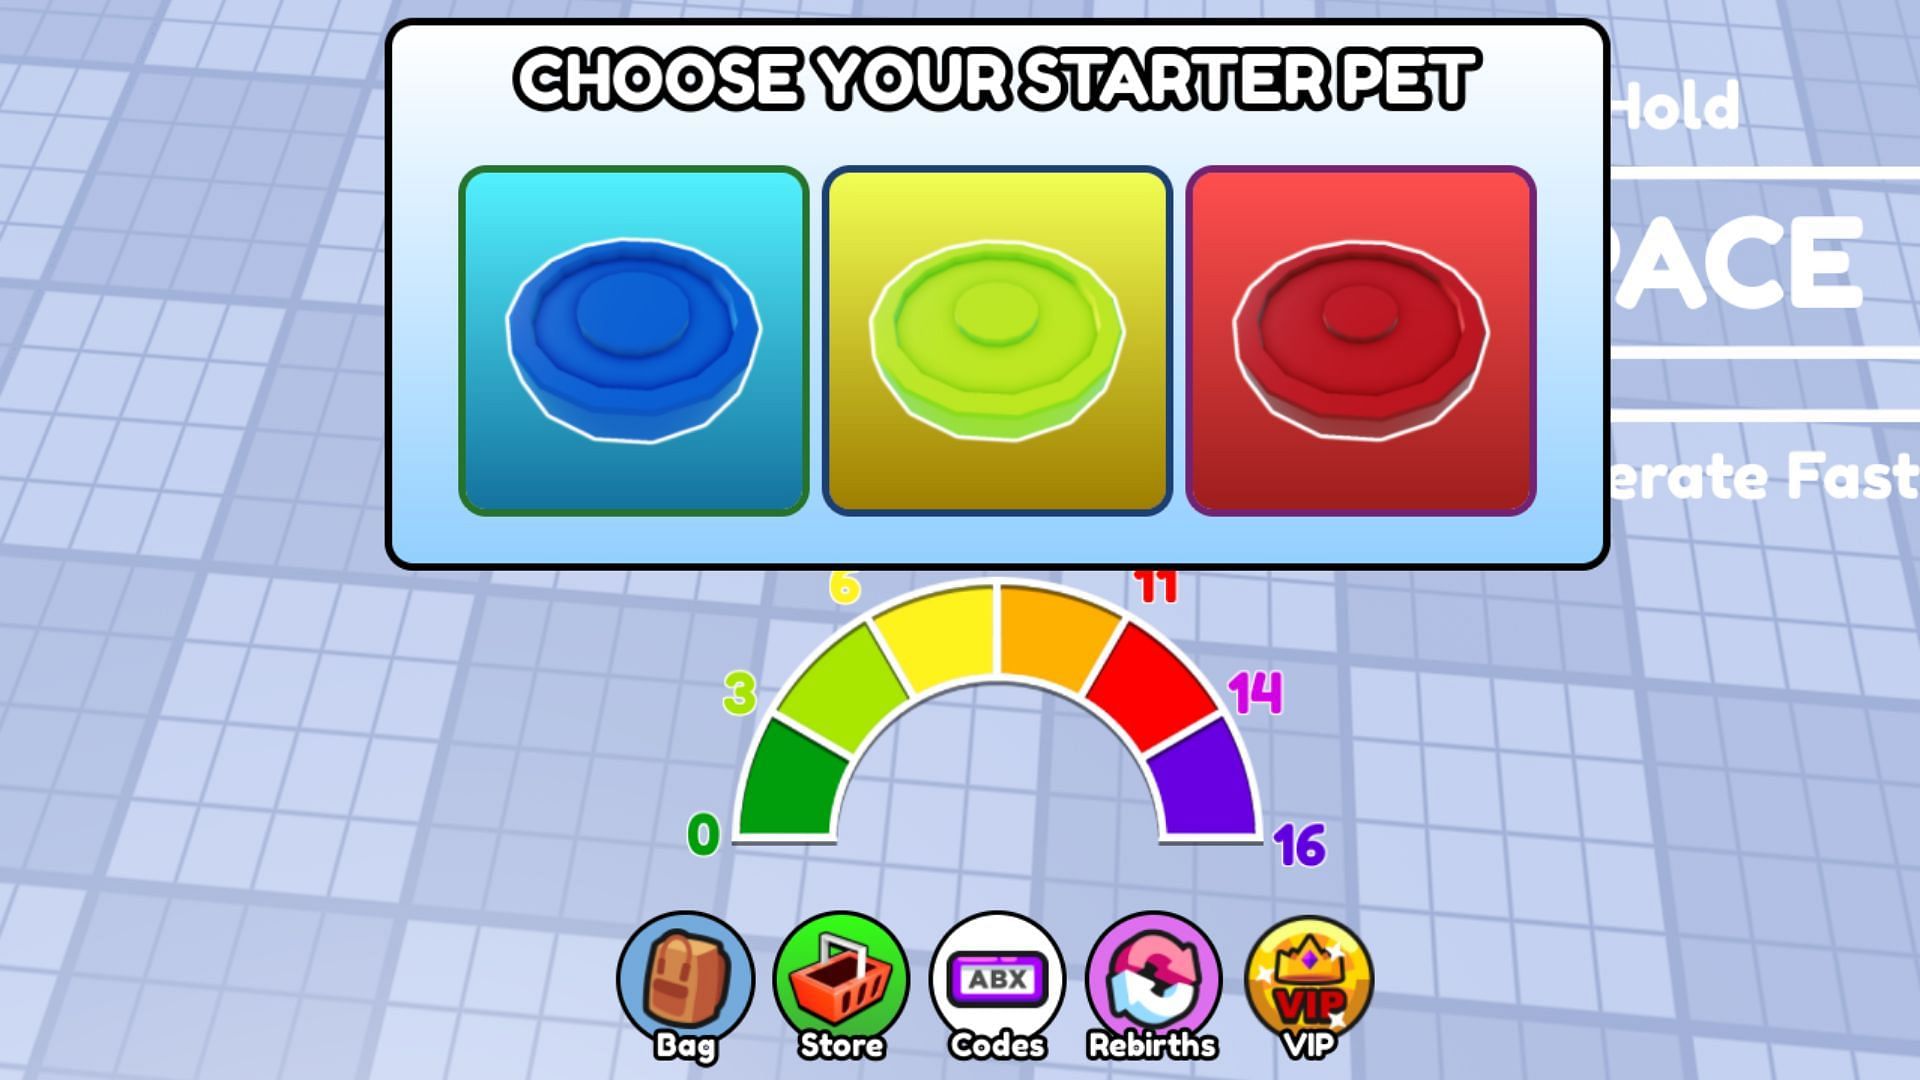 Choose your starter pet in Skydive Race Clicker (Image via Roblox)